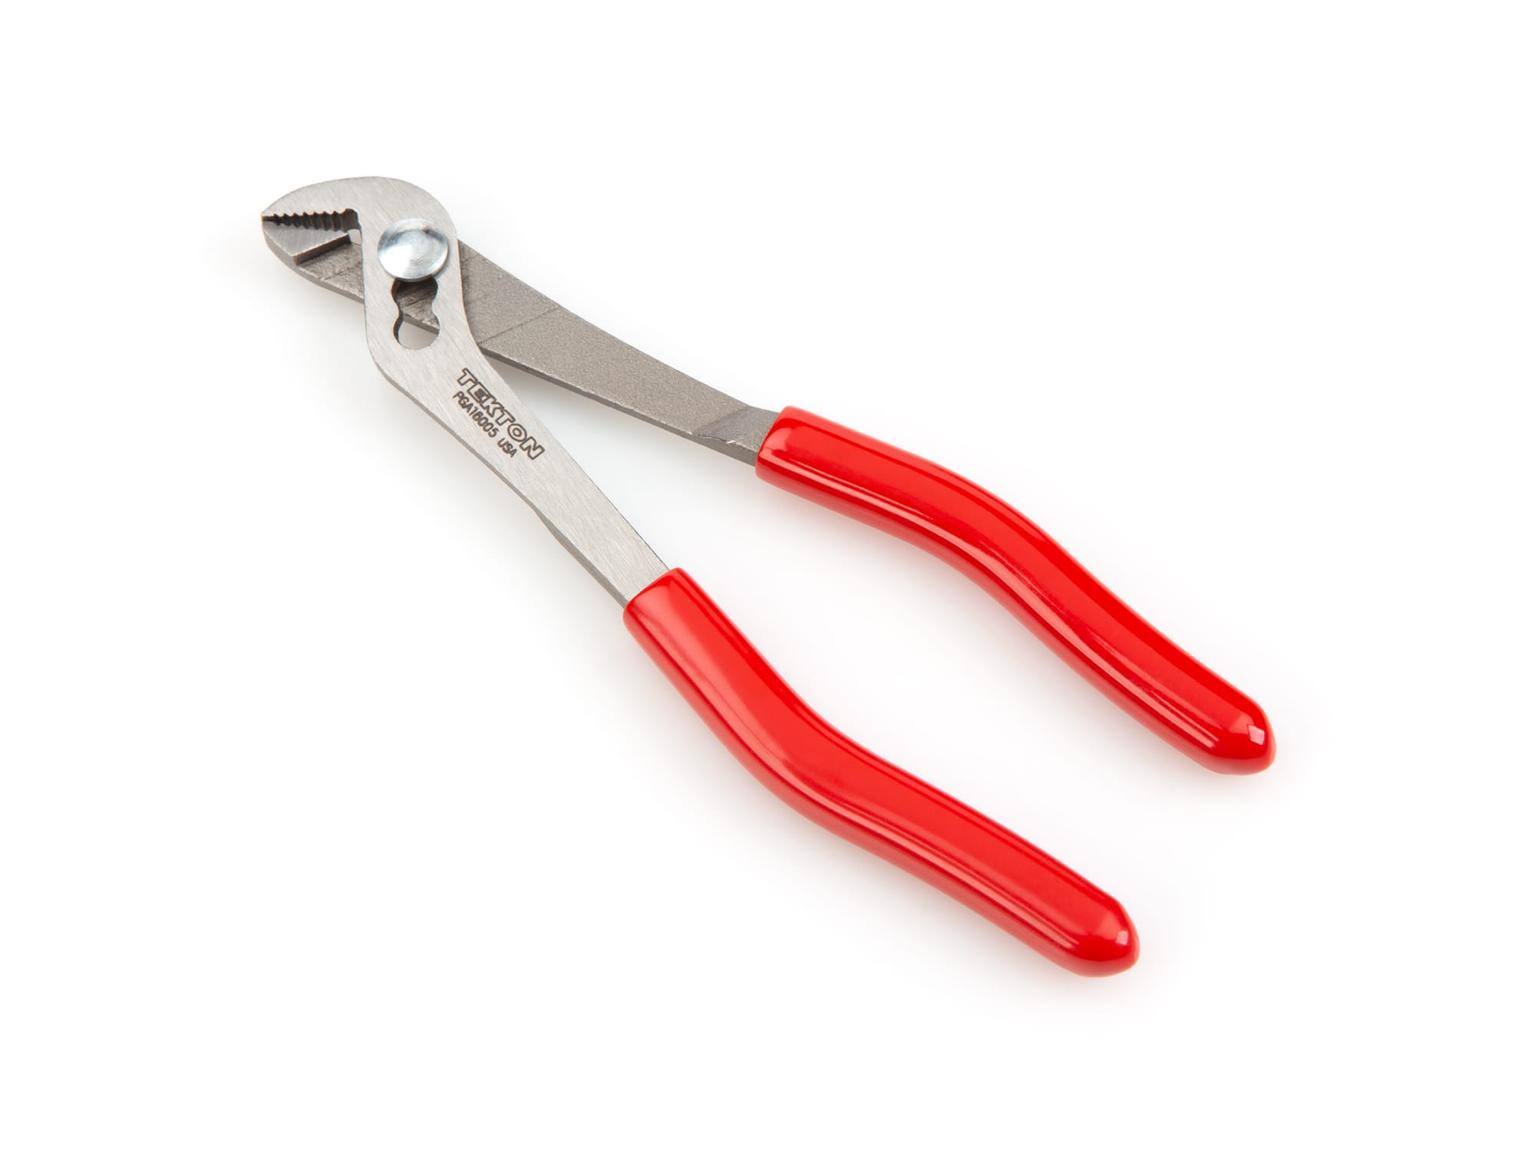 TEKTON PGA16005-T 5 Inch Angle Nose Slip Joint Pliers (1/2 in. Jaw)